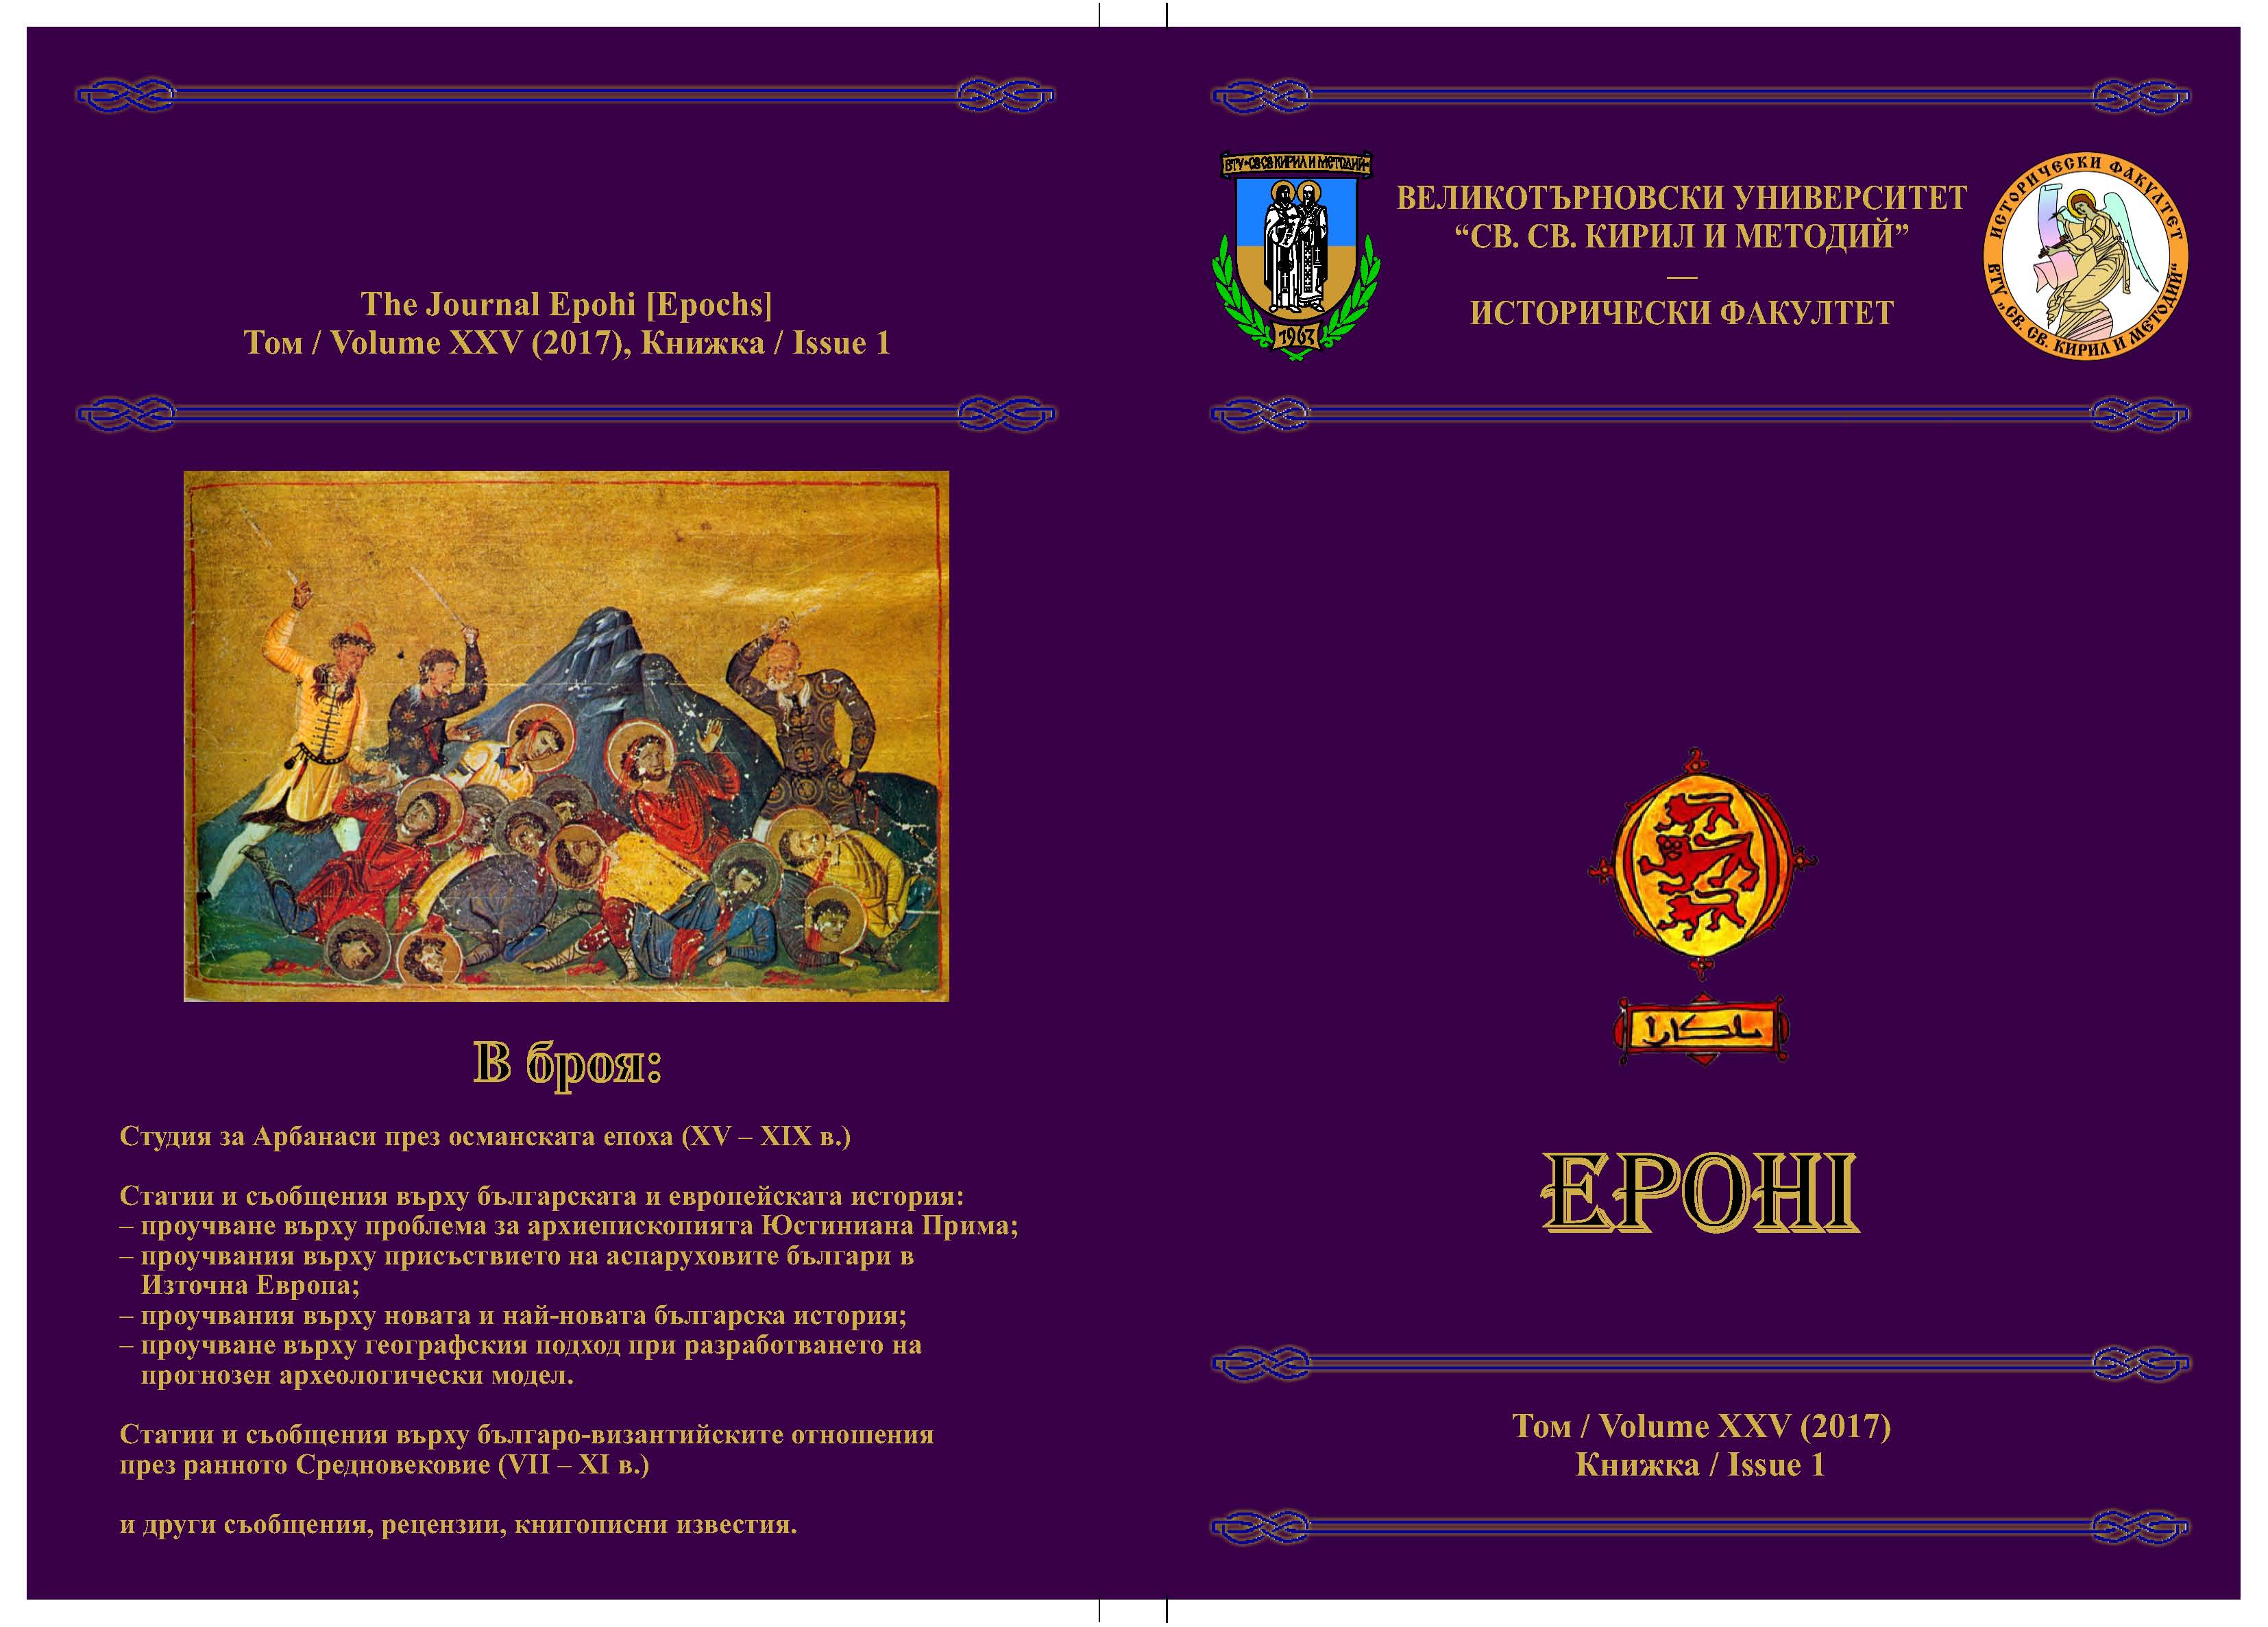 PEACE TREATIES AND AGREEMENTS BETWEEN THE BULGARIAN STATE AND THE BYZANTINE EMPIRE UNTIL 717 AD Cover Image